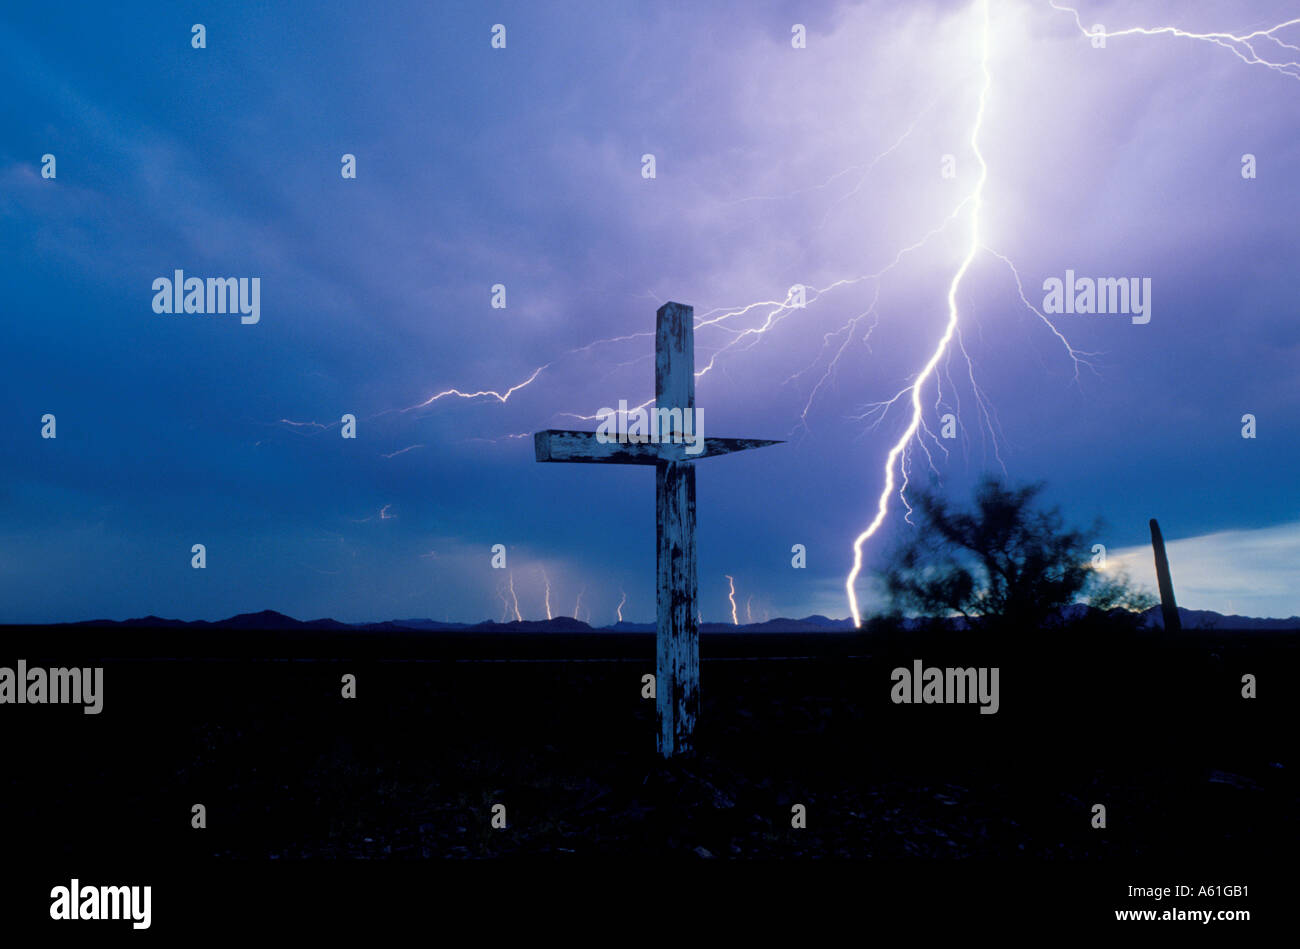 Huge lightning bolt crashes down close to a large wooden cross in southern Arizona on Native American land near Ajo, AZ. USA Stock Photo